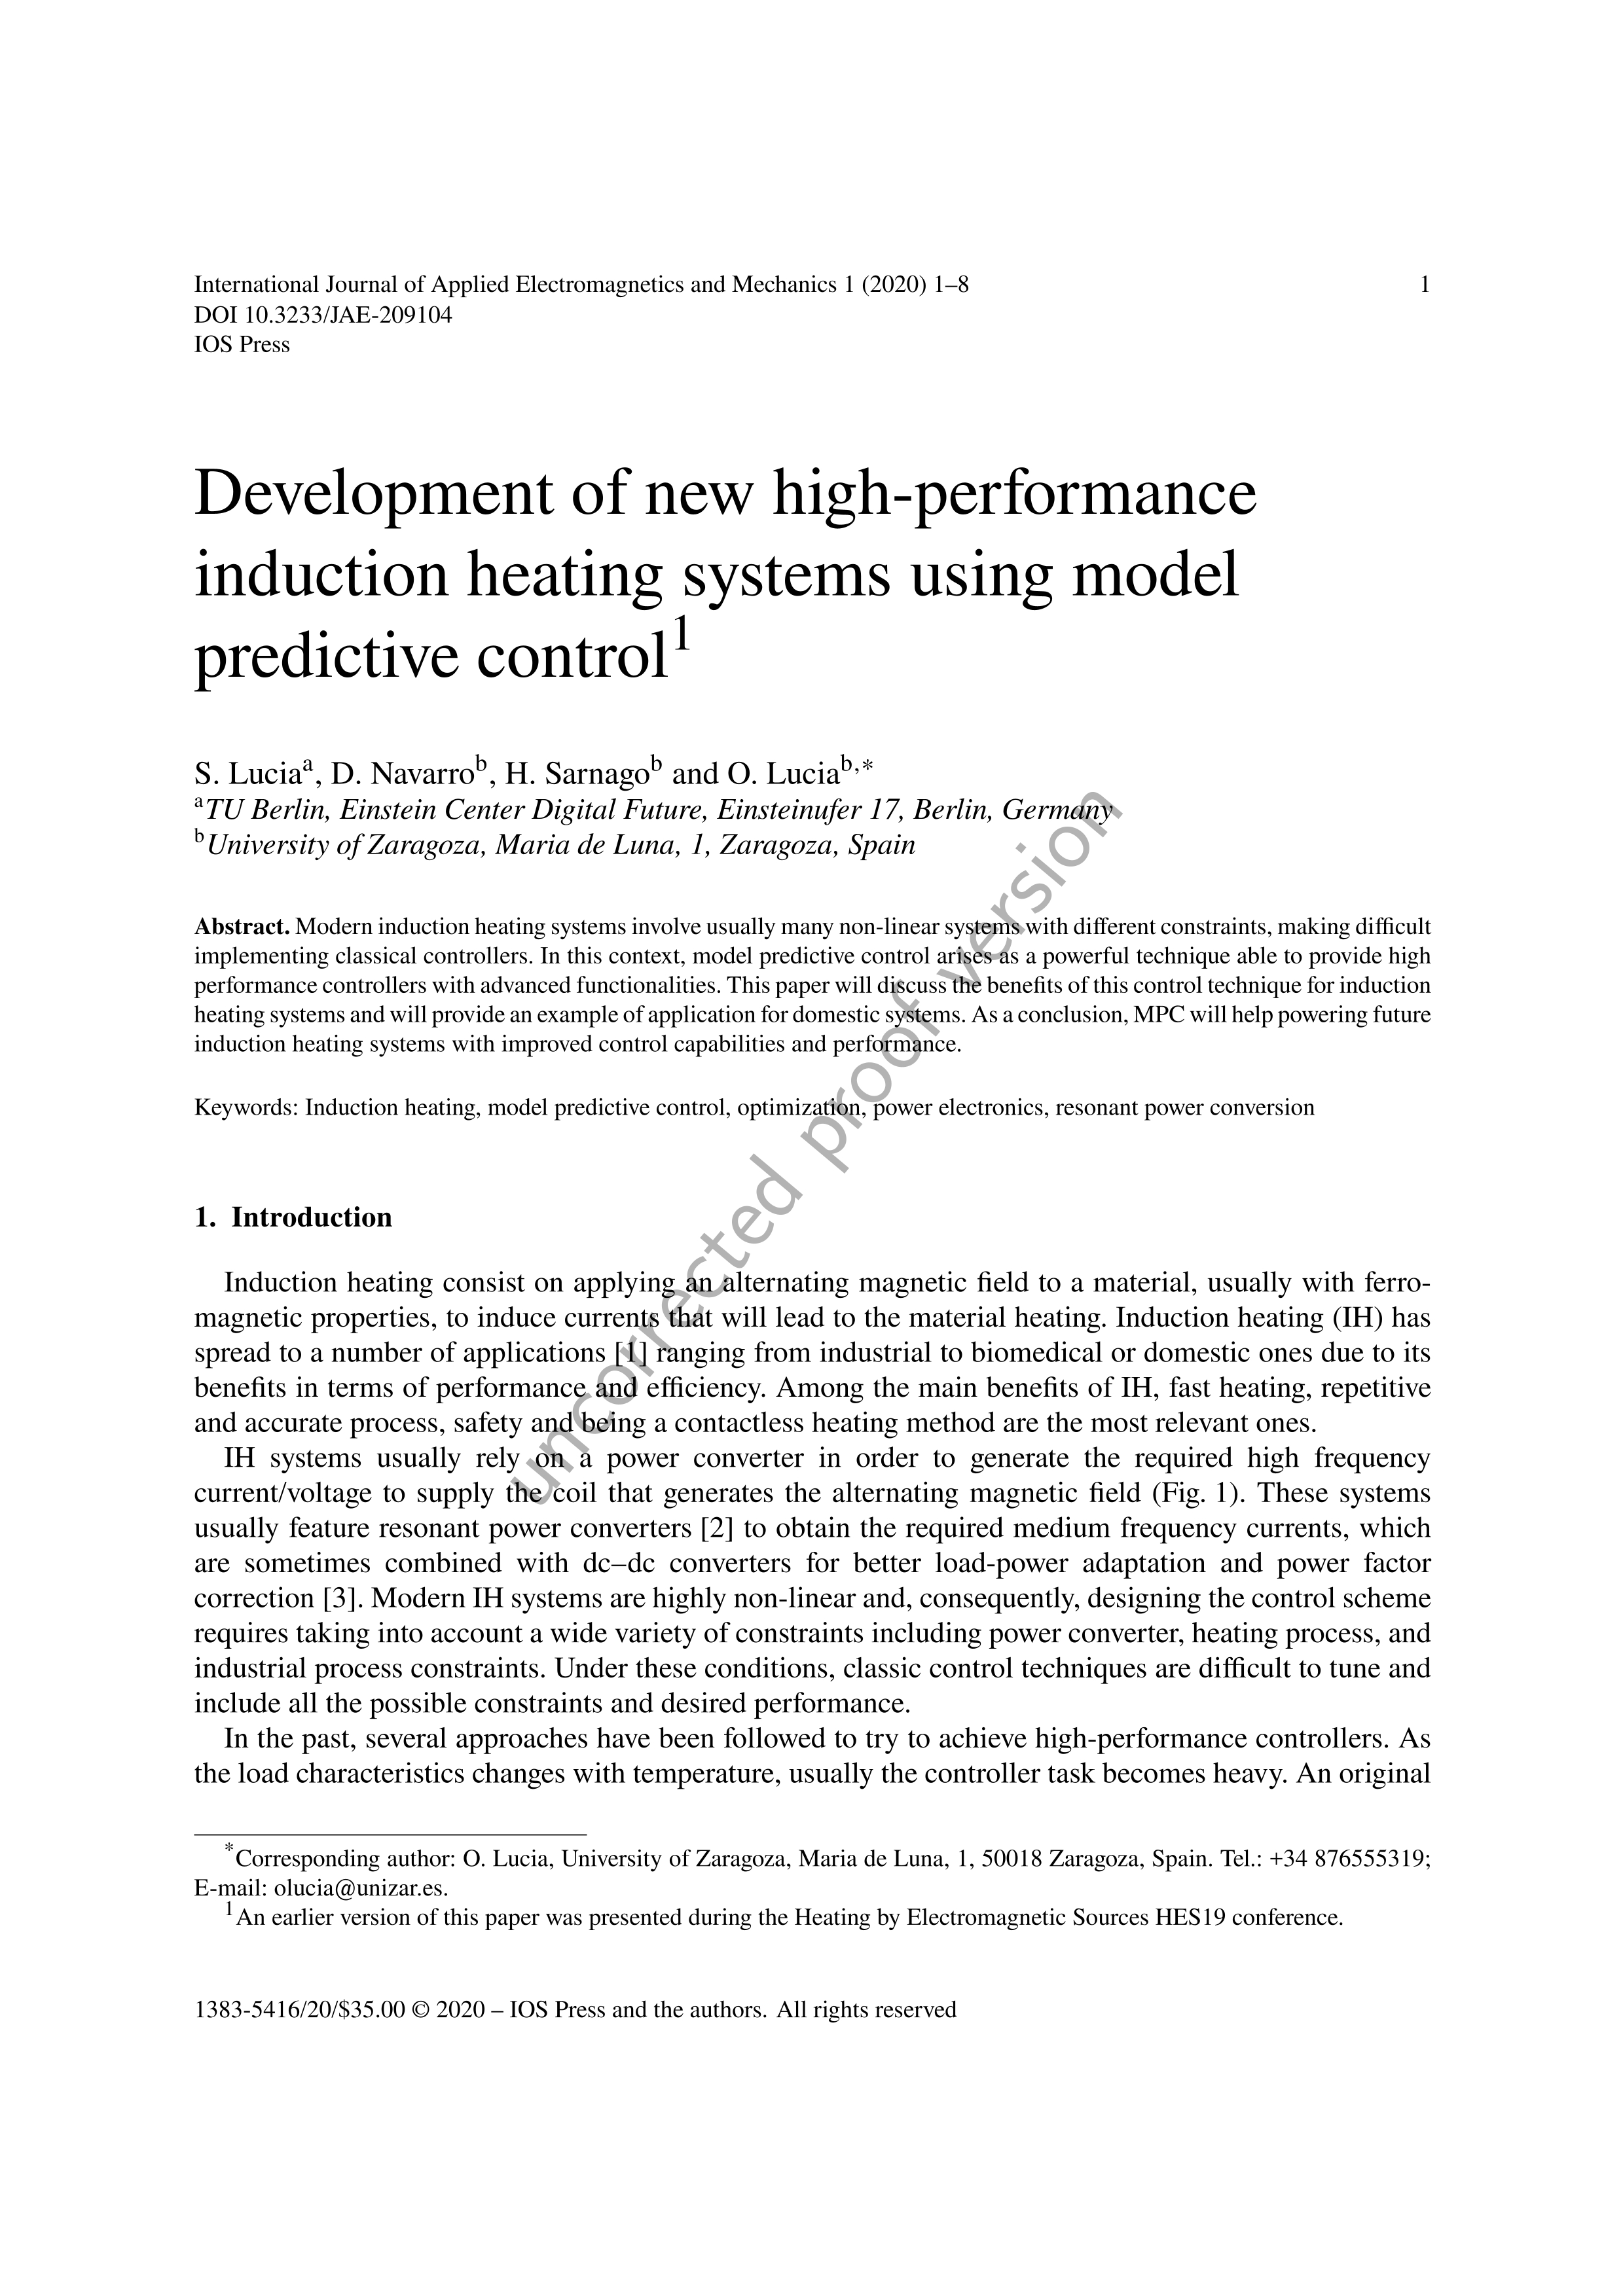 Development of new high-performance induction heating systems using model predictive control